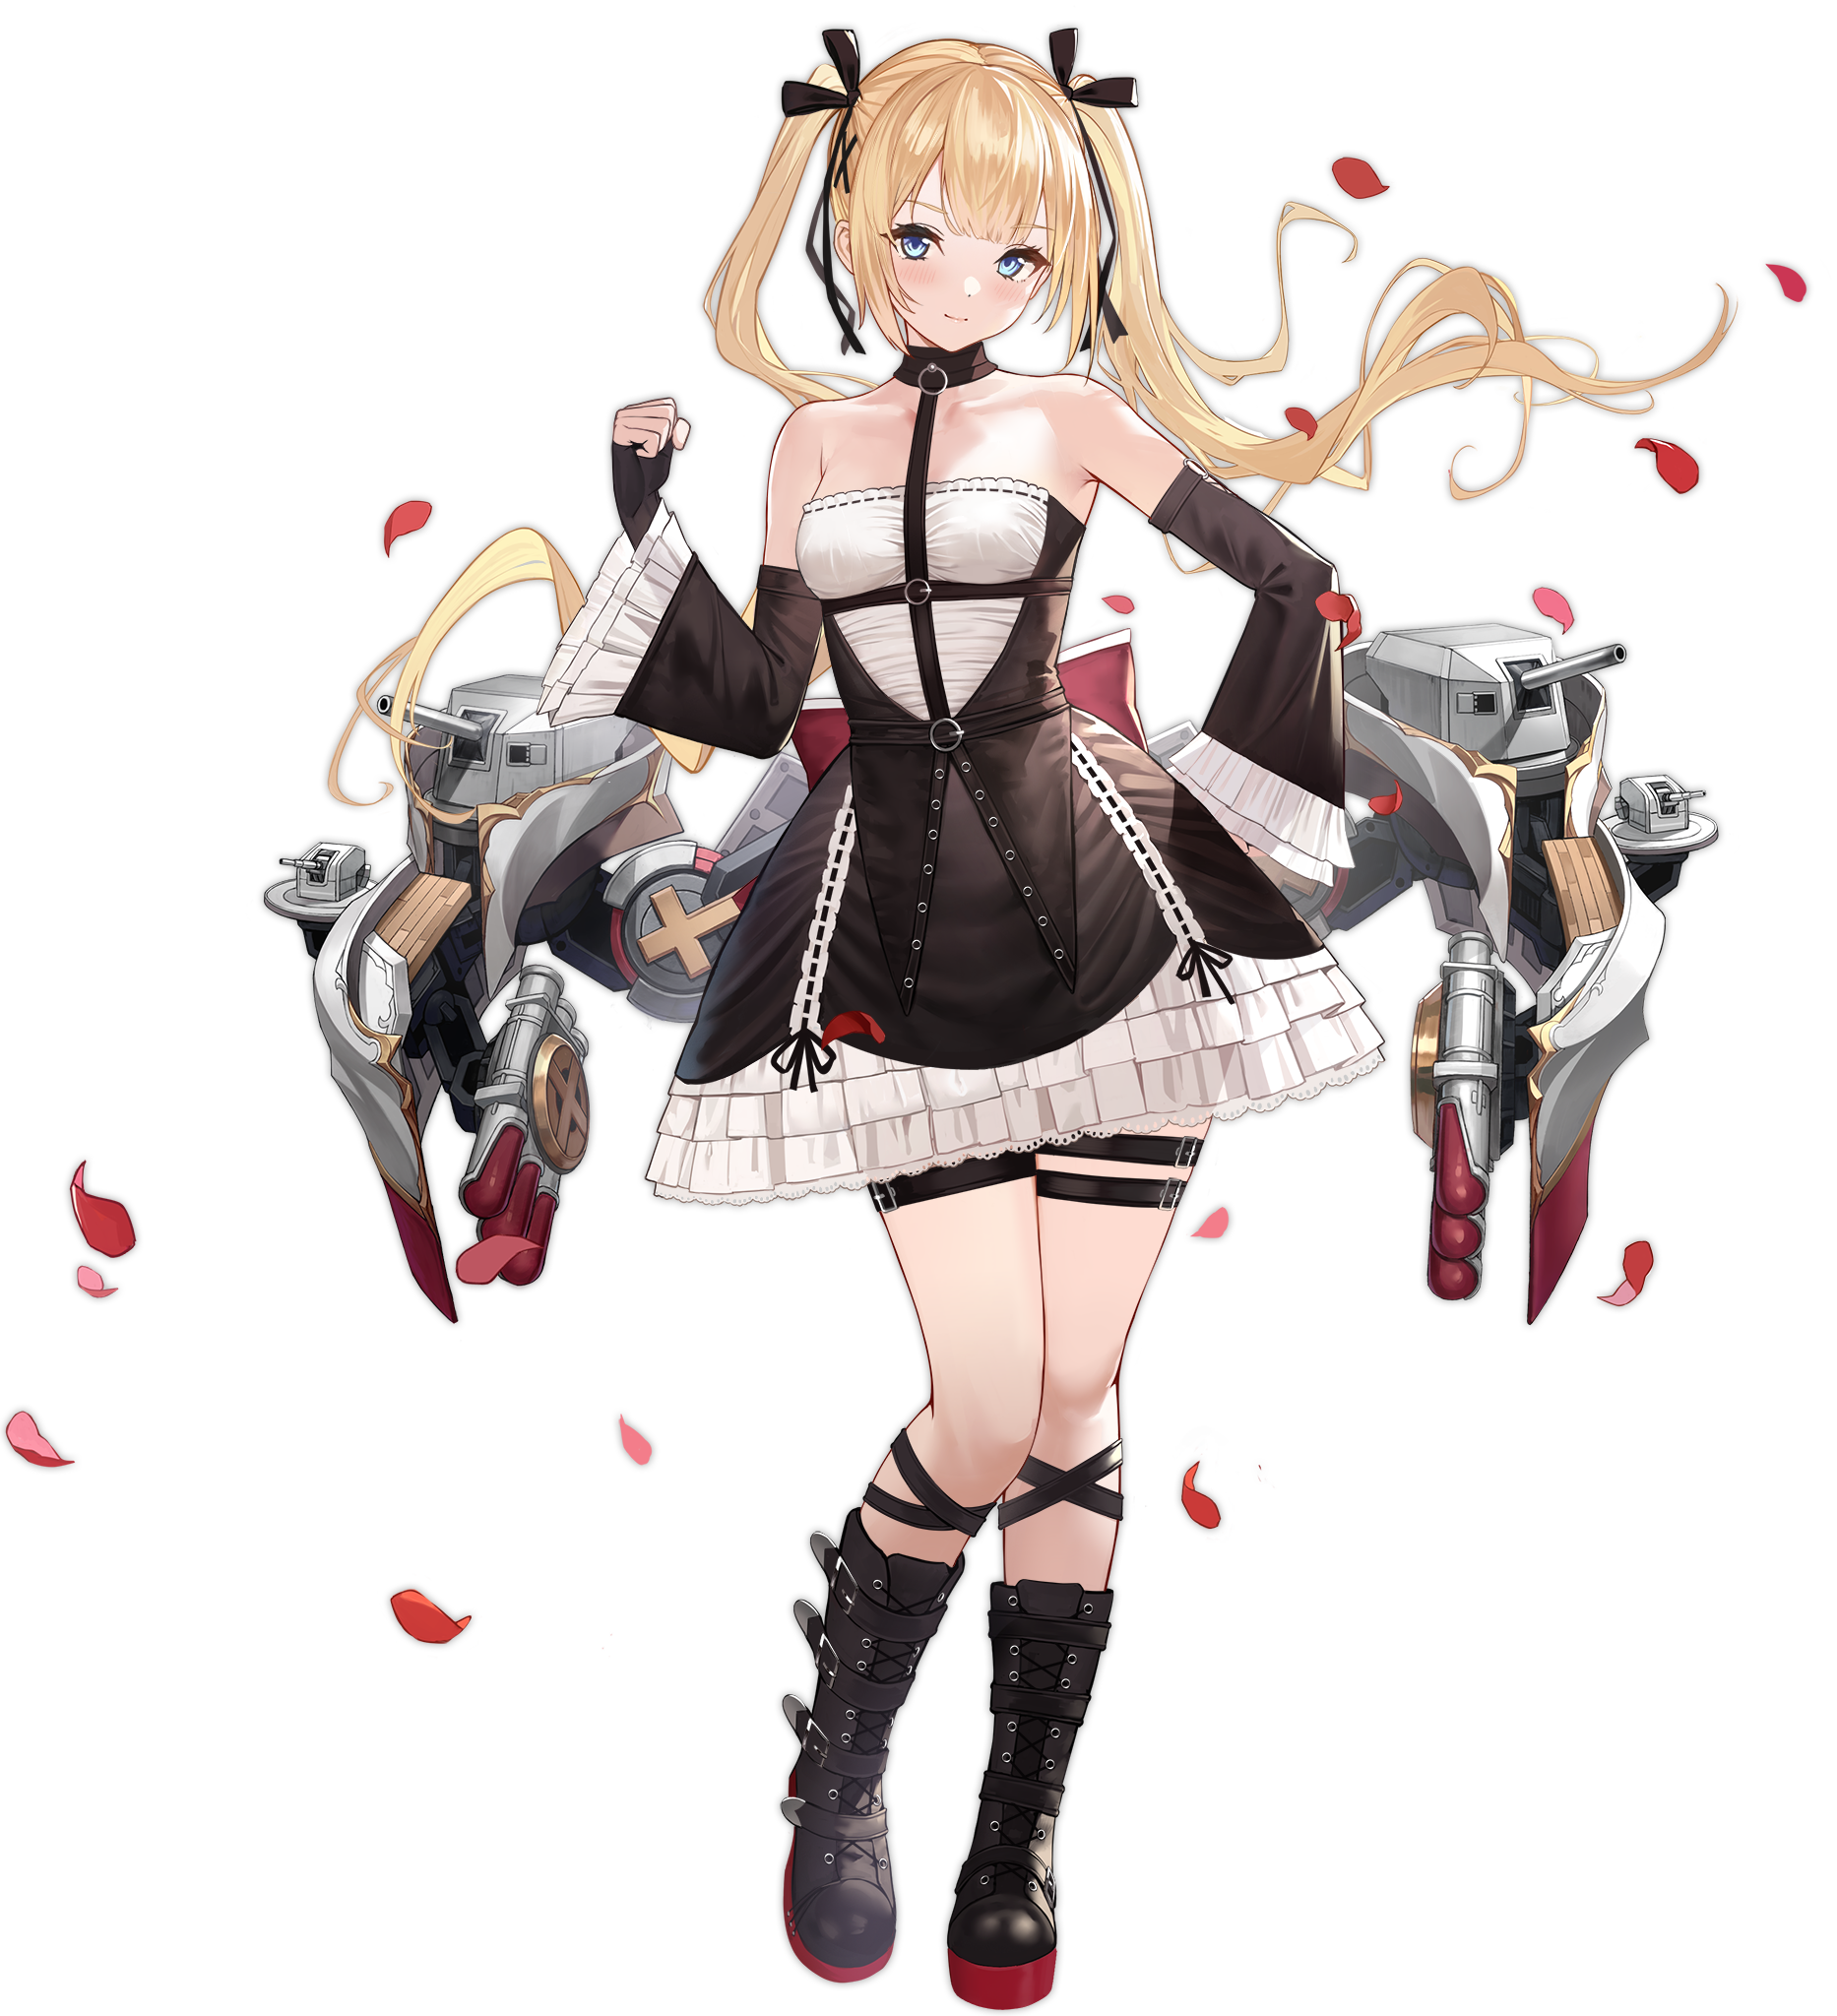 Anime 1866x2048 anime girls Azur Lane Dead or Alive Yunsang video games video game girls video game warriors video game characters blonde long hair black background simple background Marie Rose (Dead or Alive)